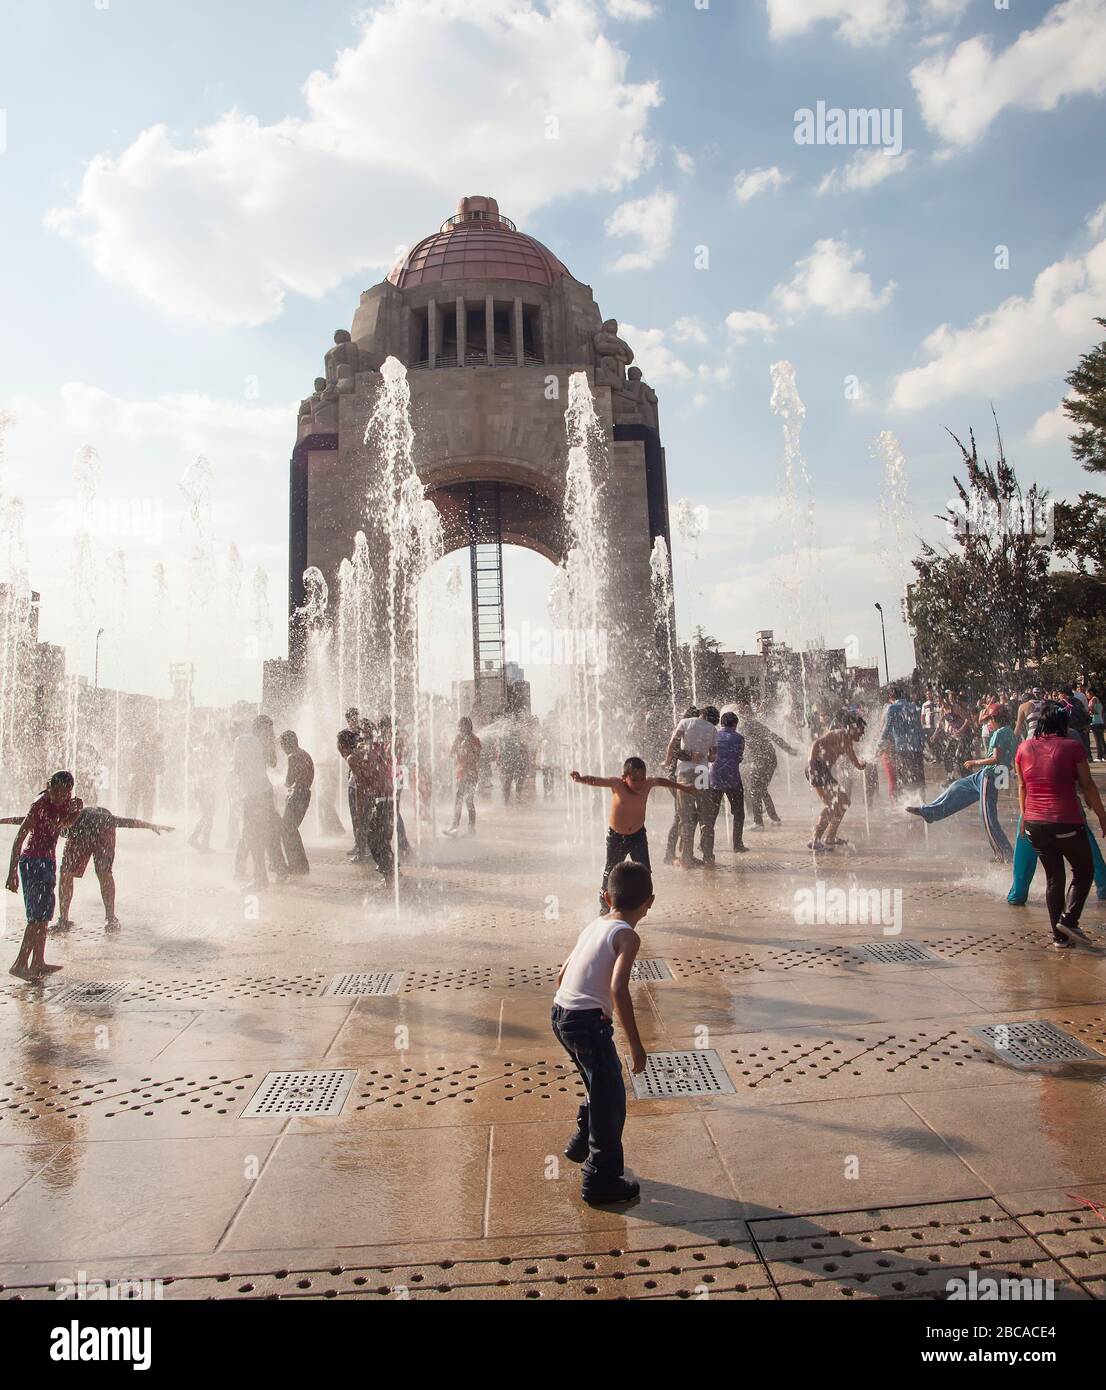 Mexico City youngsters coolling off in fountains Stock Photo